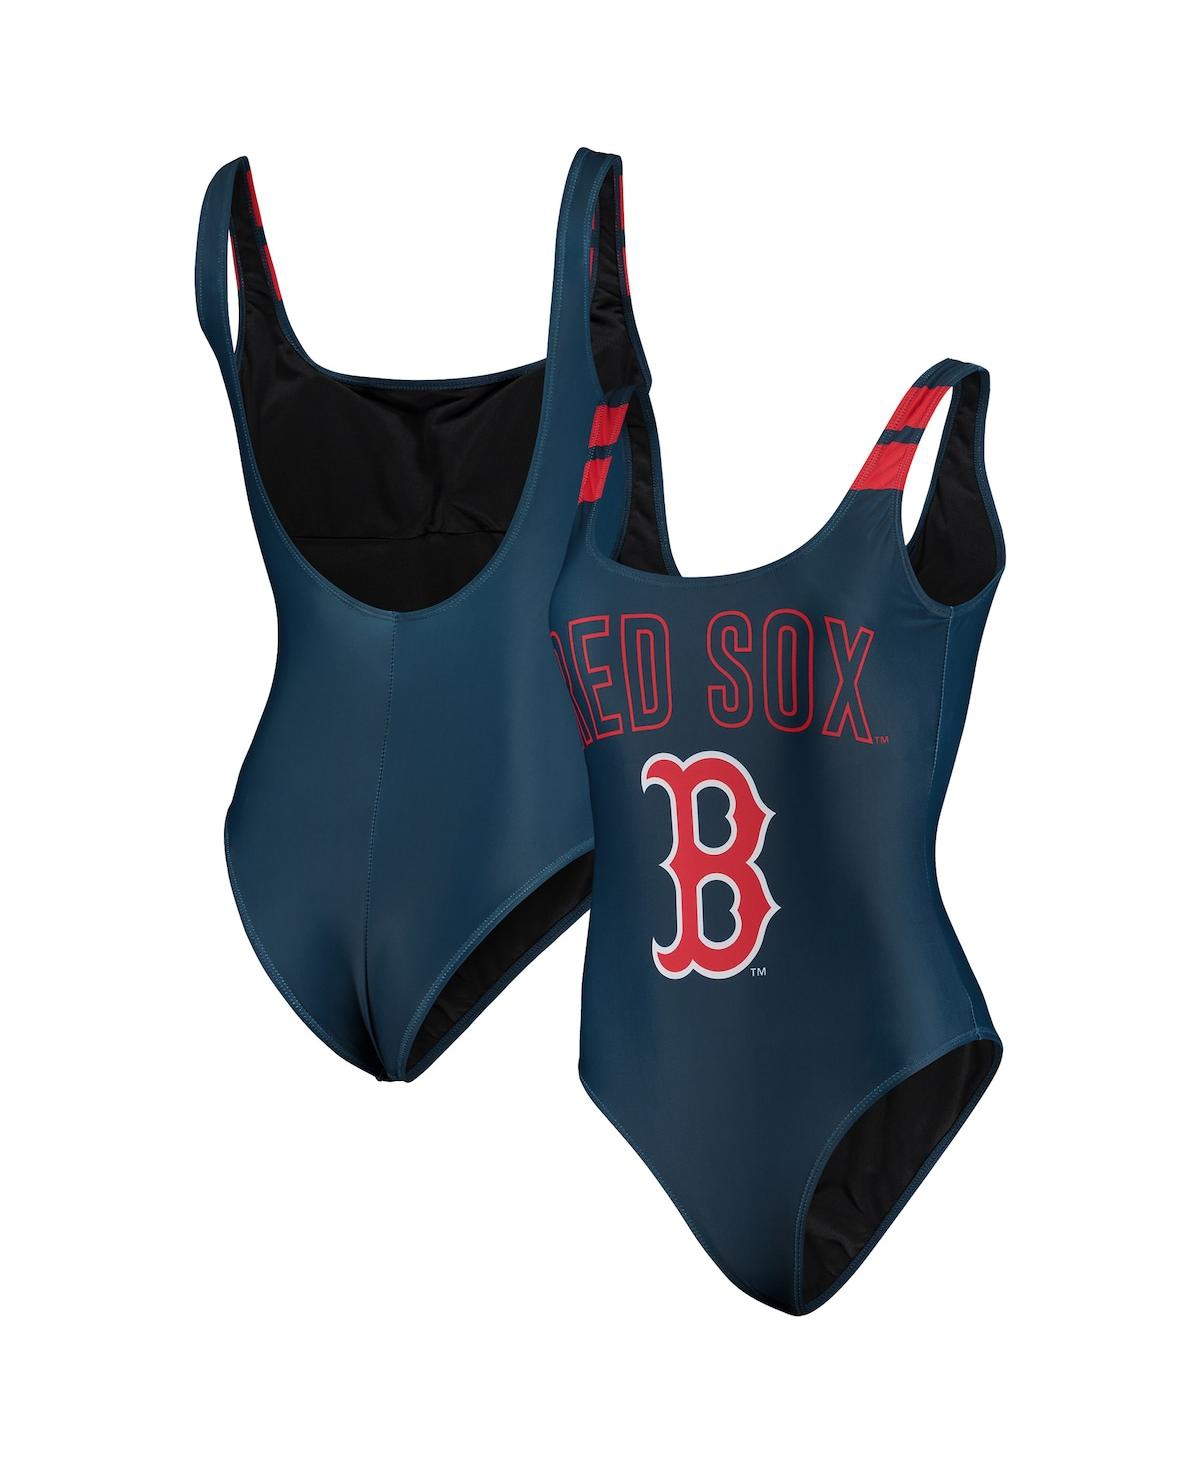 Women's Foco Navy Boston Red Sox One-Piece Bathing Suit - Navy